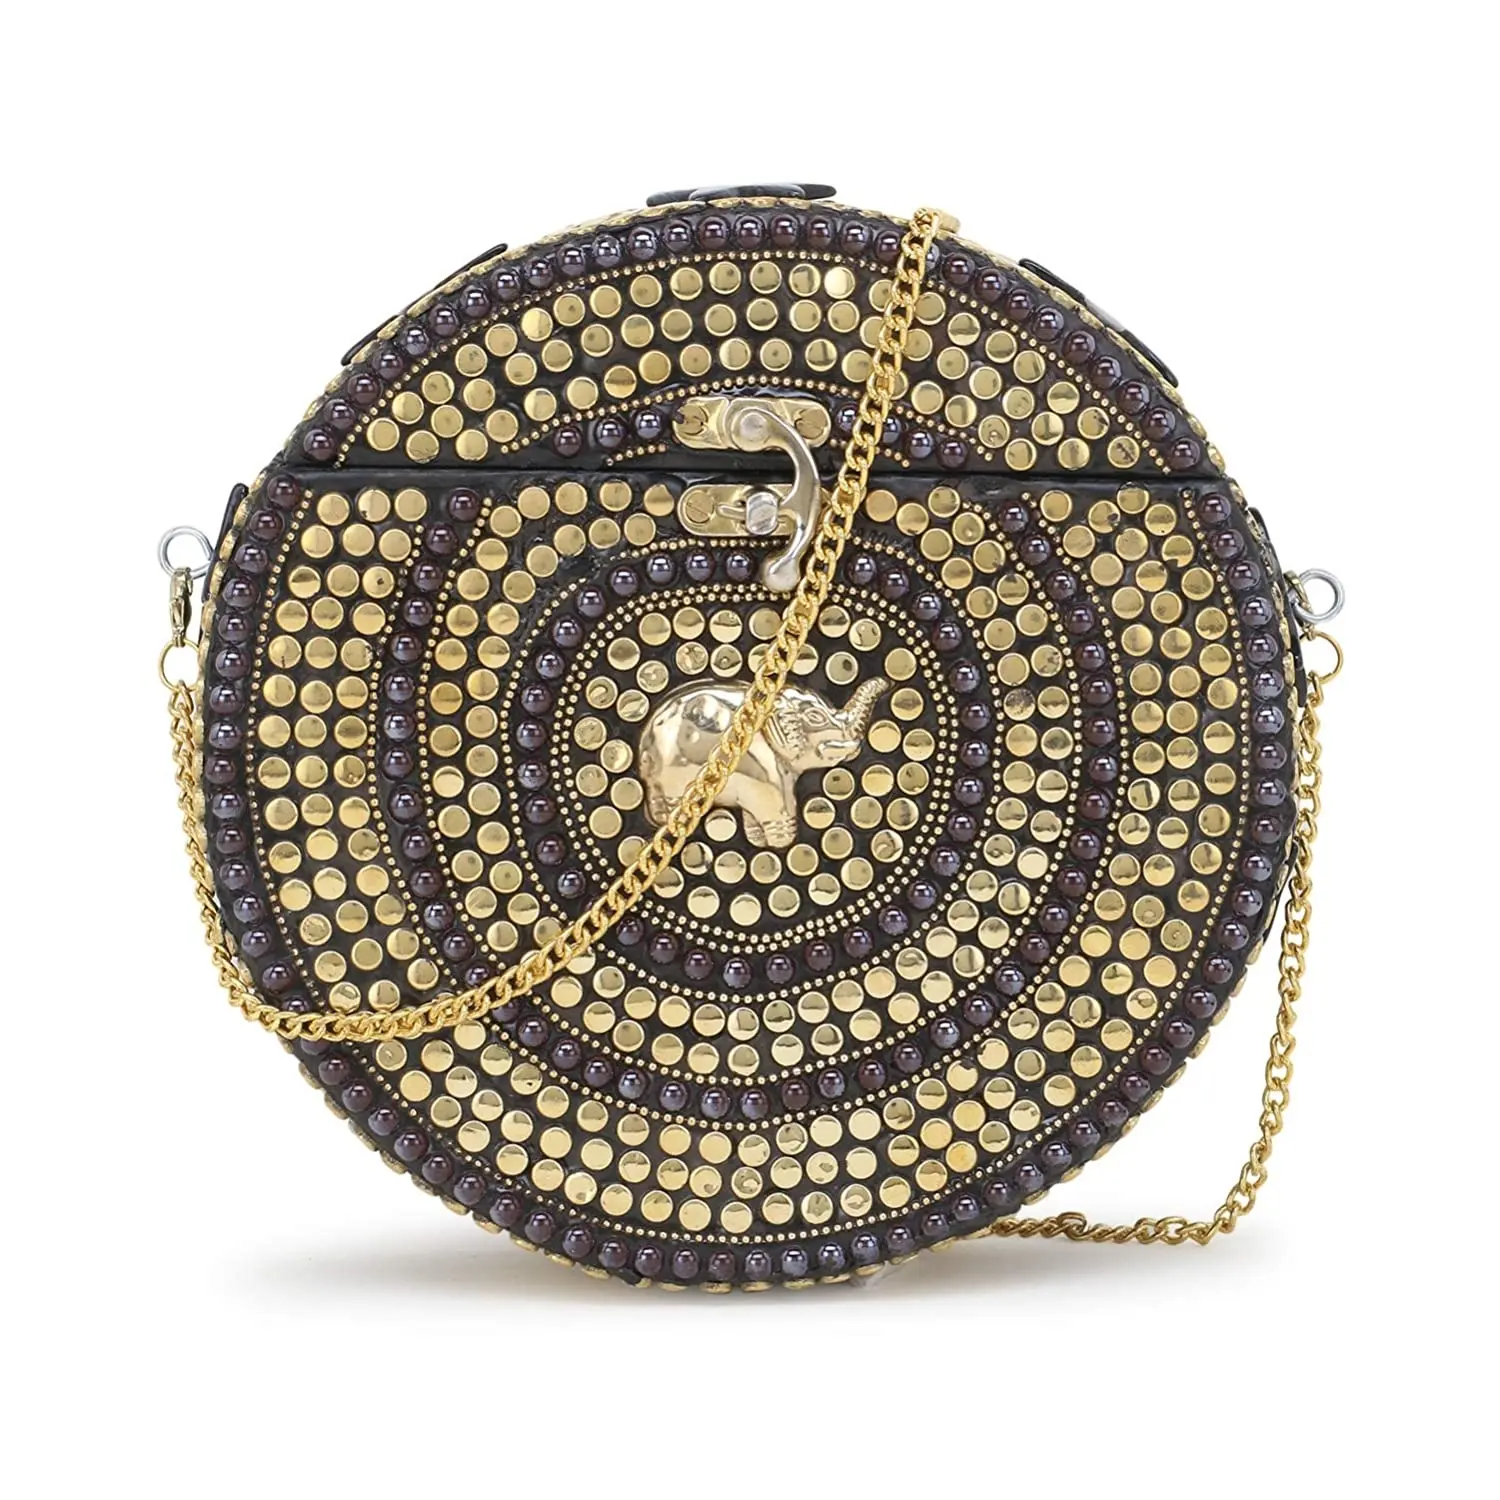 2022 Trending Mosaic Clutch Bag Elephant Design Round Metal Sling Bags Pearl Bead Inlay borsa a mano indiana all'ingrosso